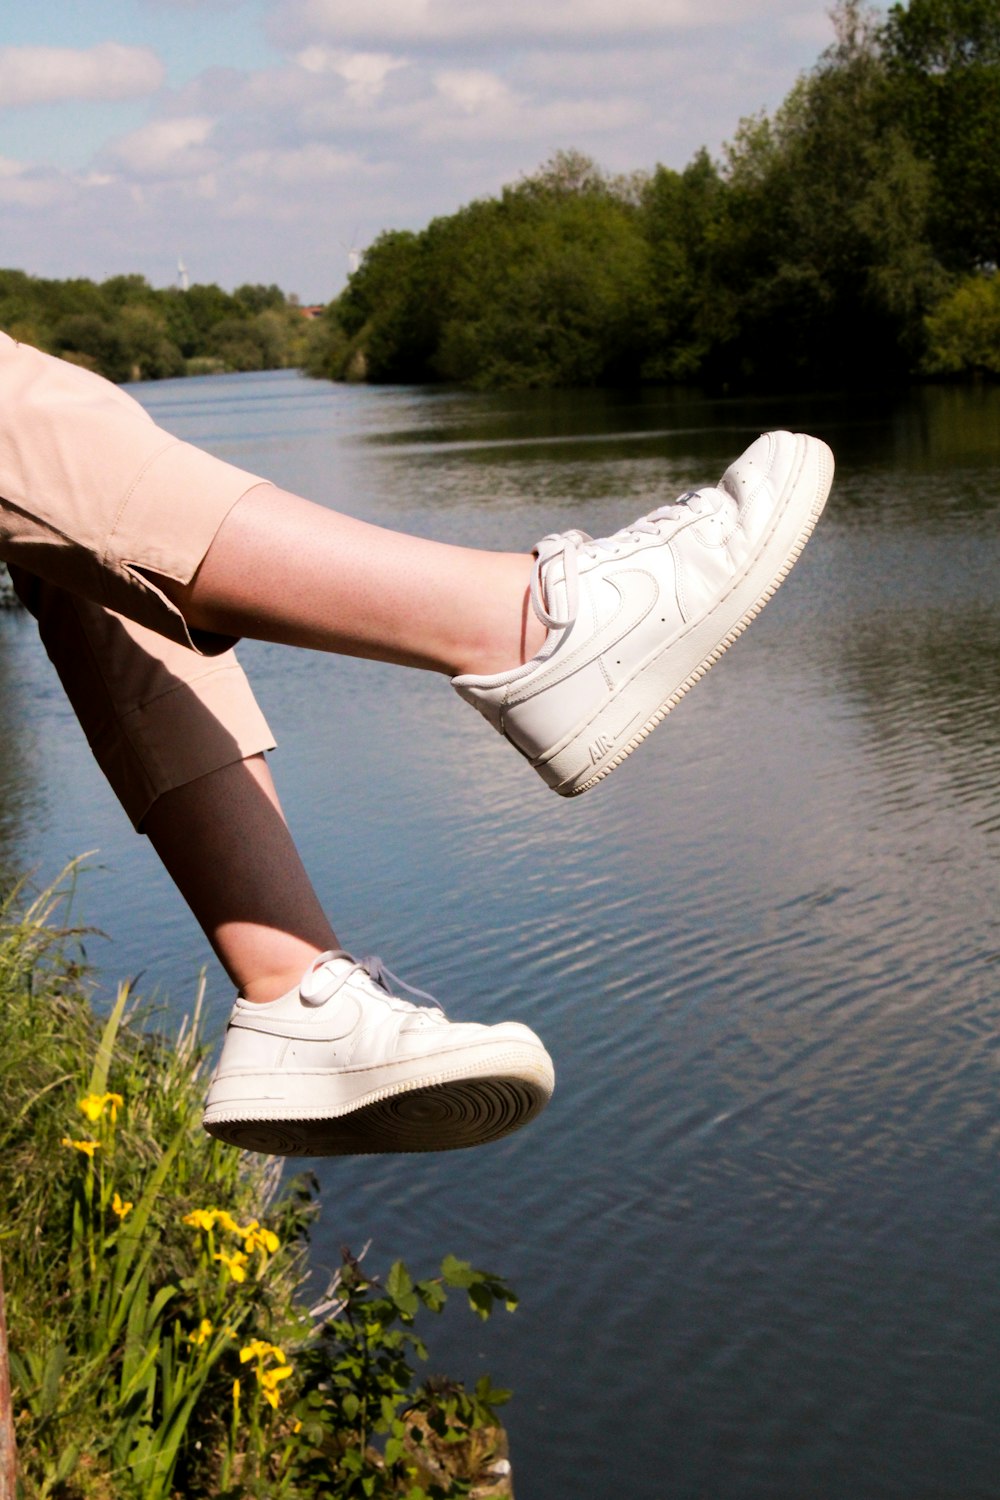 woman in white leather shoes standing on green grass near body of water during daytime